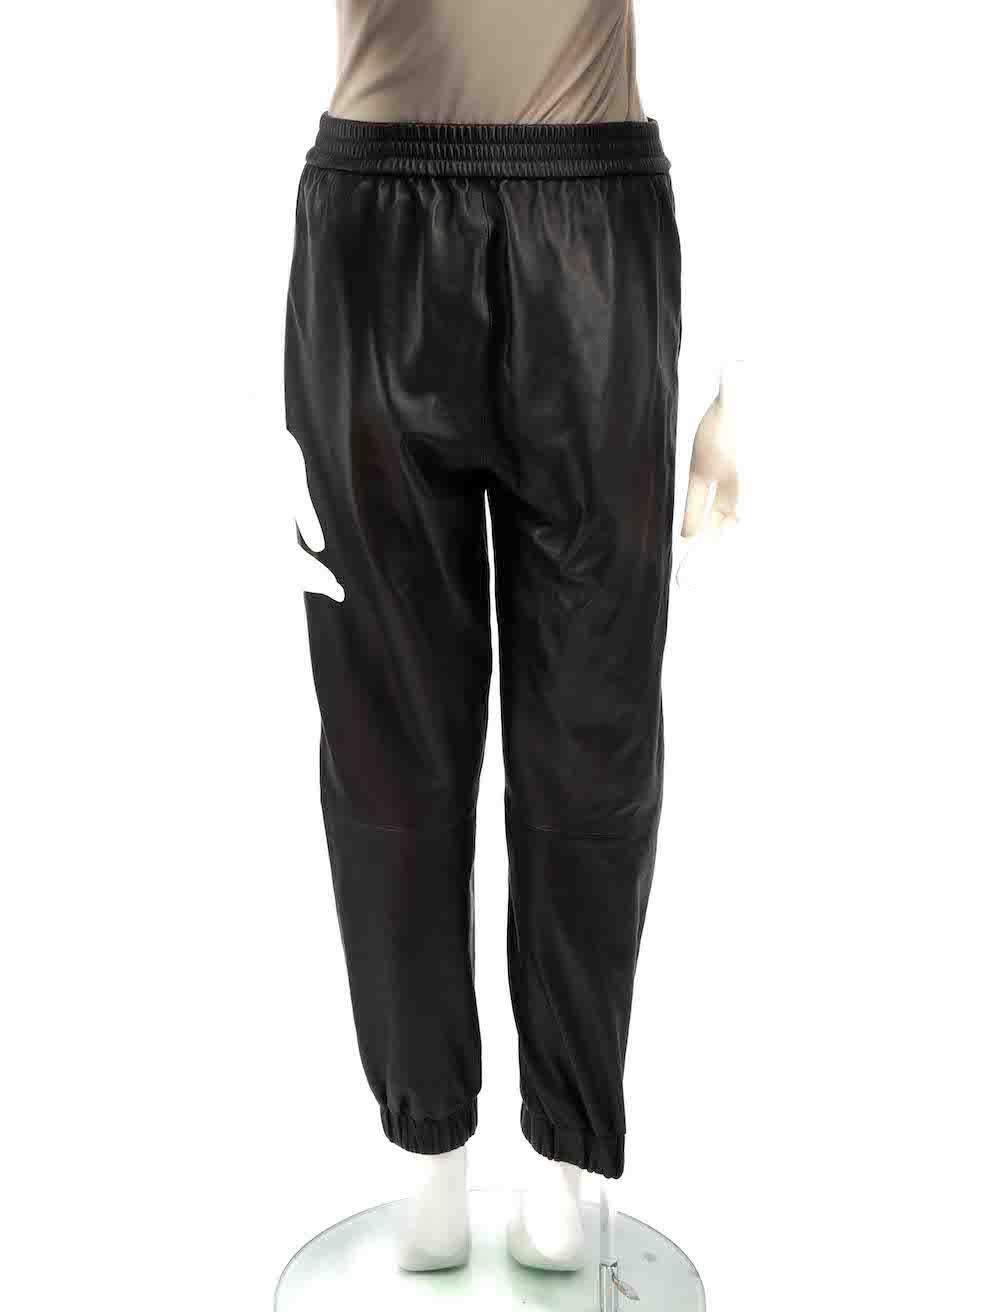 All Saints Black Leather Jen Cuff Joggers Size M In Good Condition For Sale In London, GB